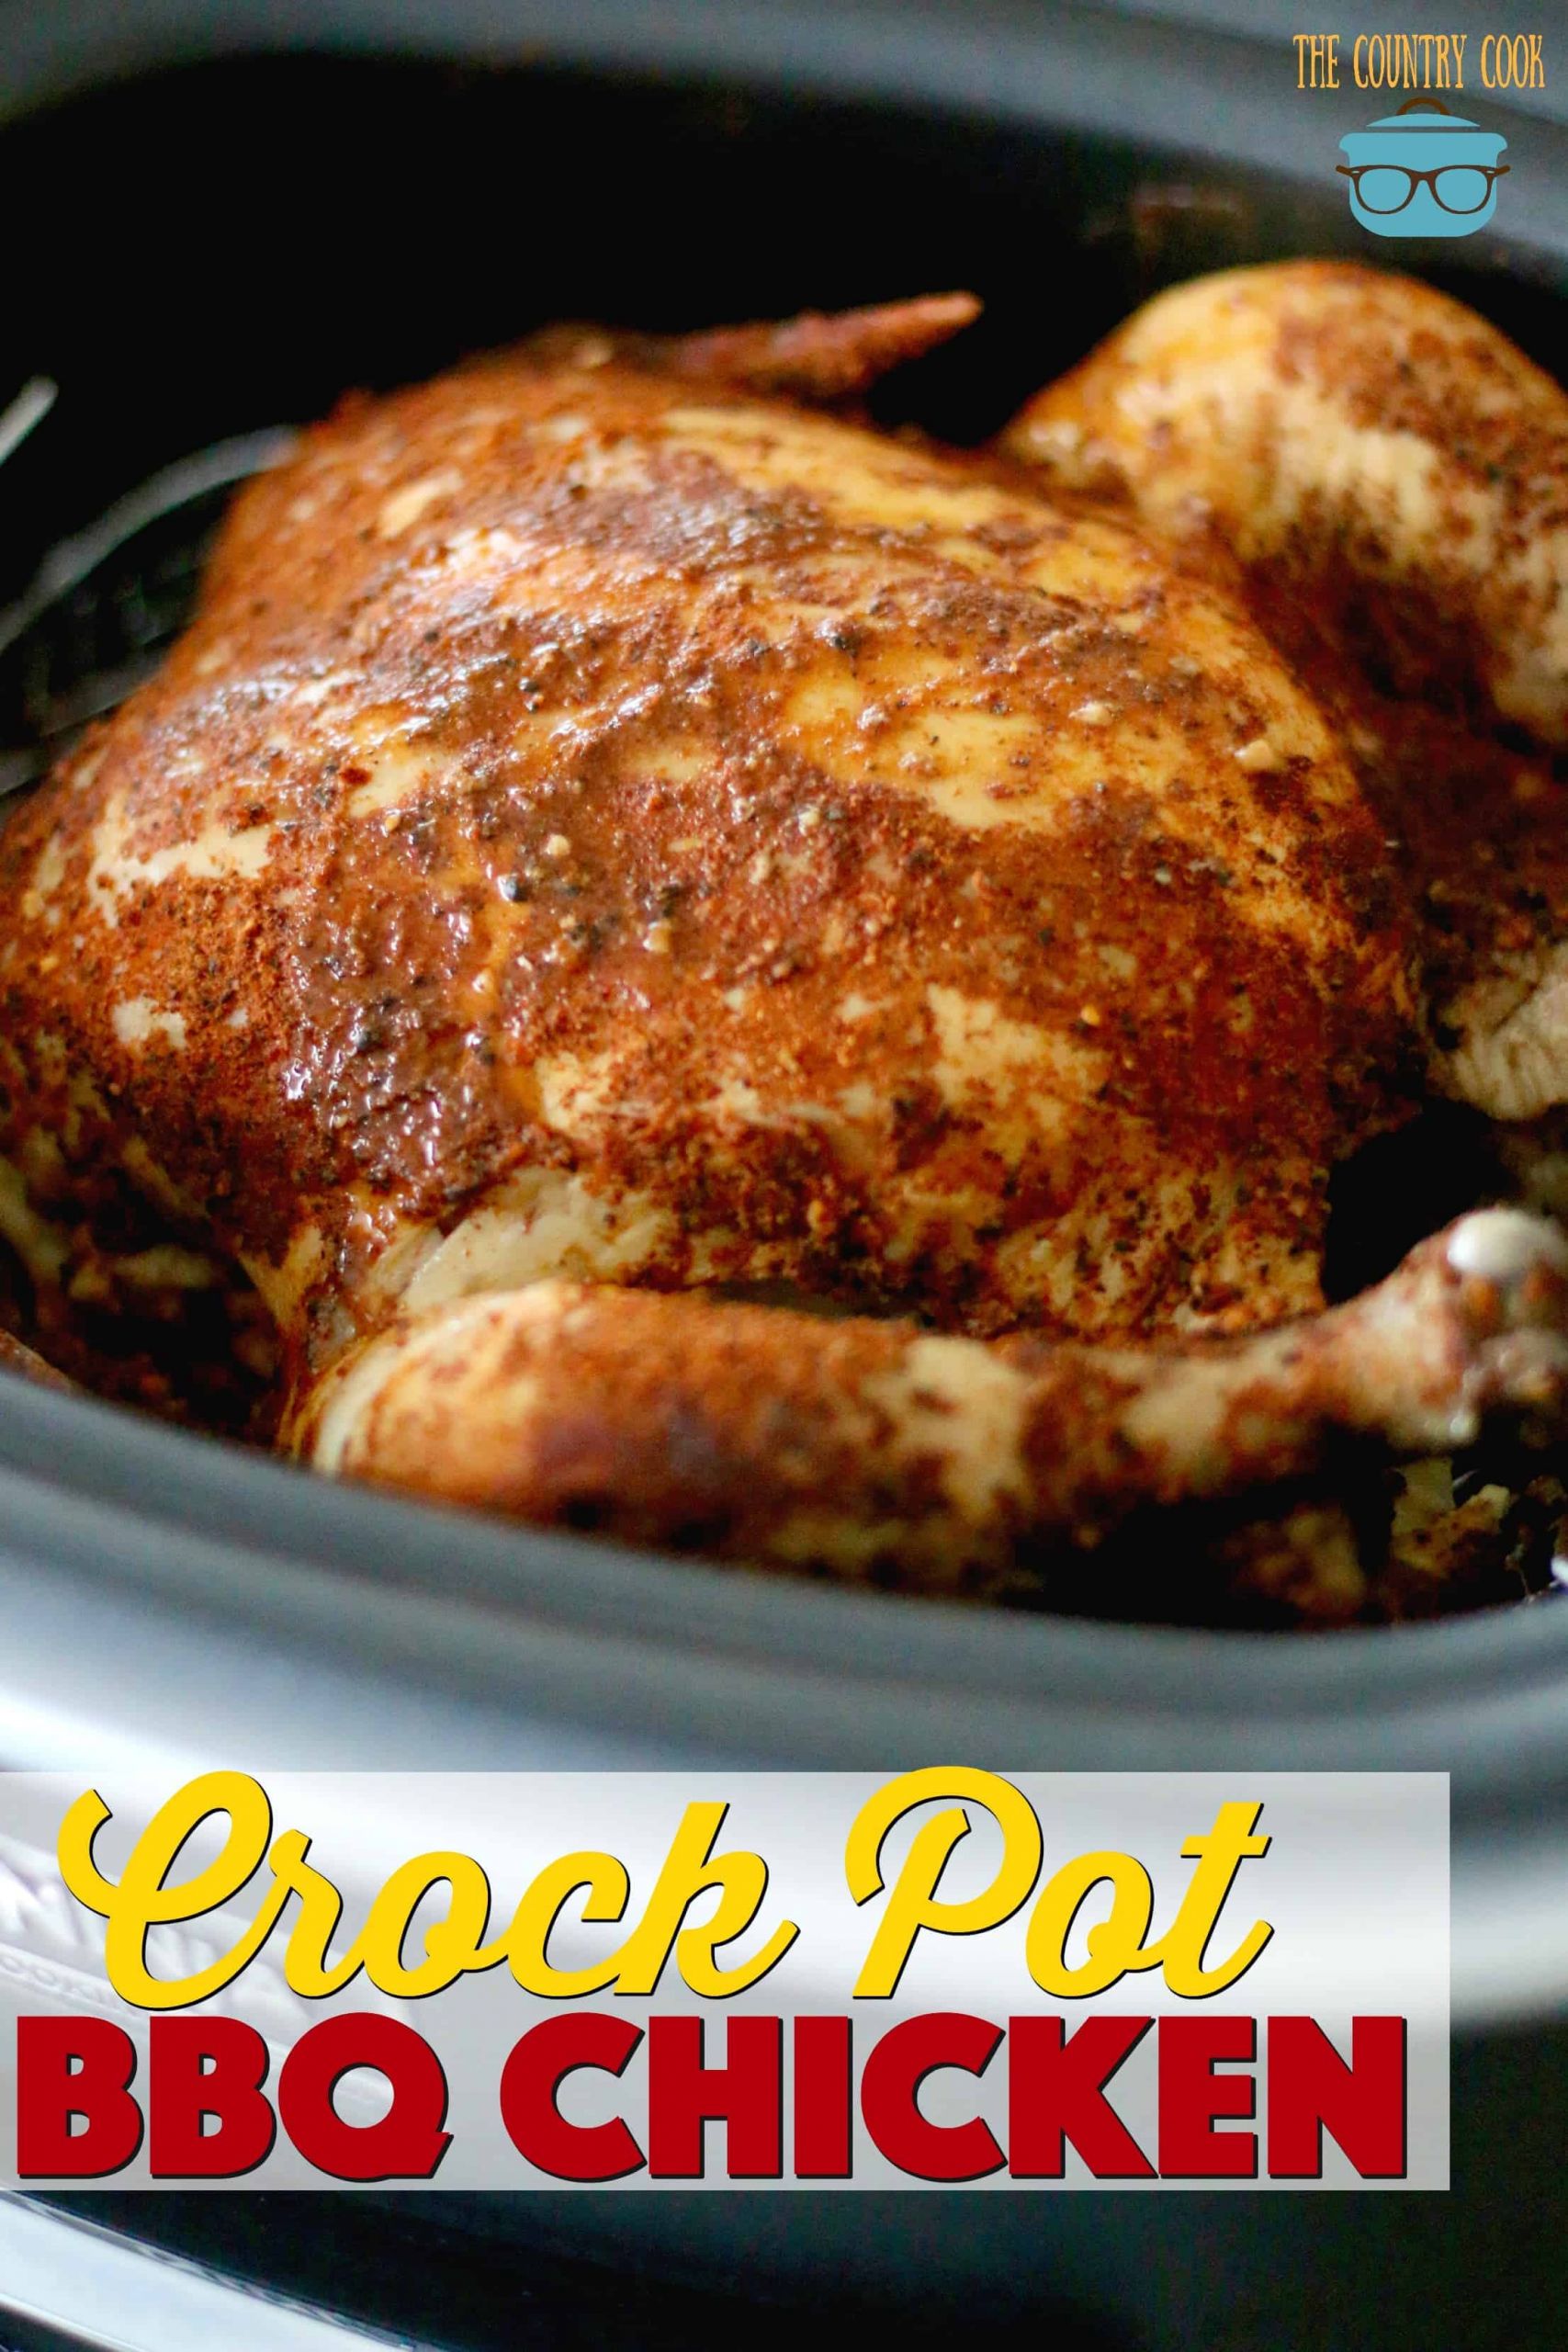 Cook whole Chicken In Crock Pot New Crock Pot whole Bbq Chicken the Country Cook Slow Cooker